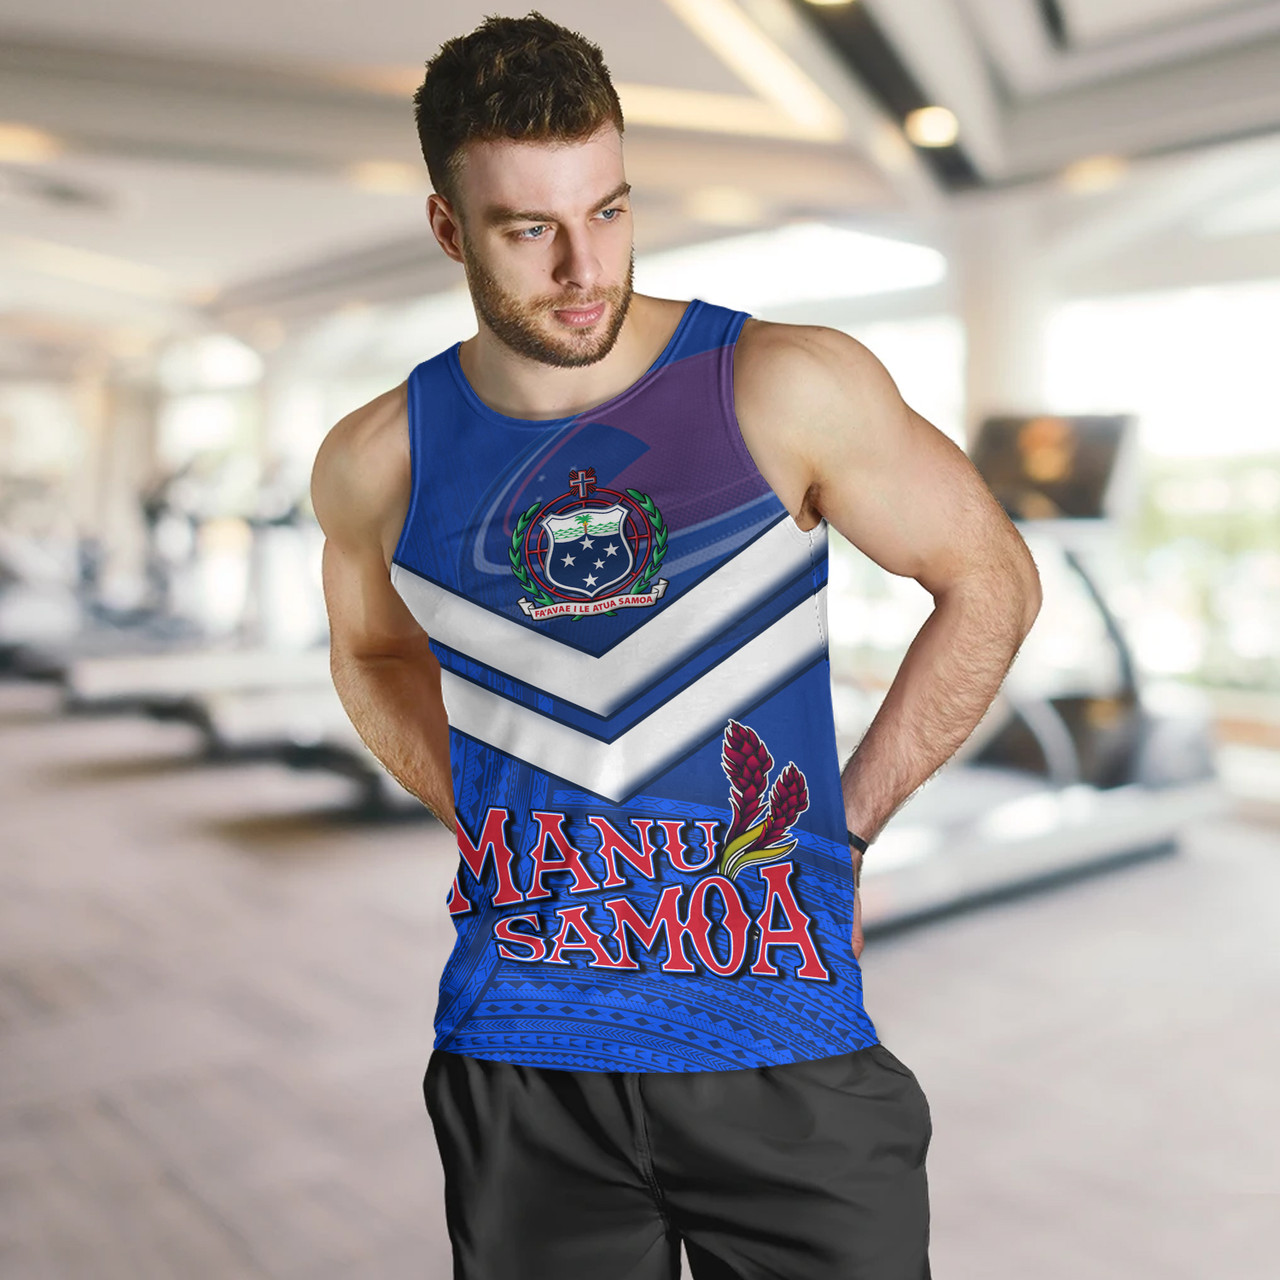 Samoa Tank Top Samoa Tradition Patterns With Rugby Ball